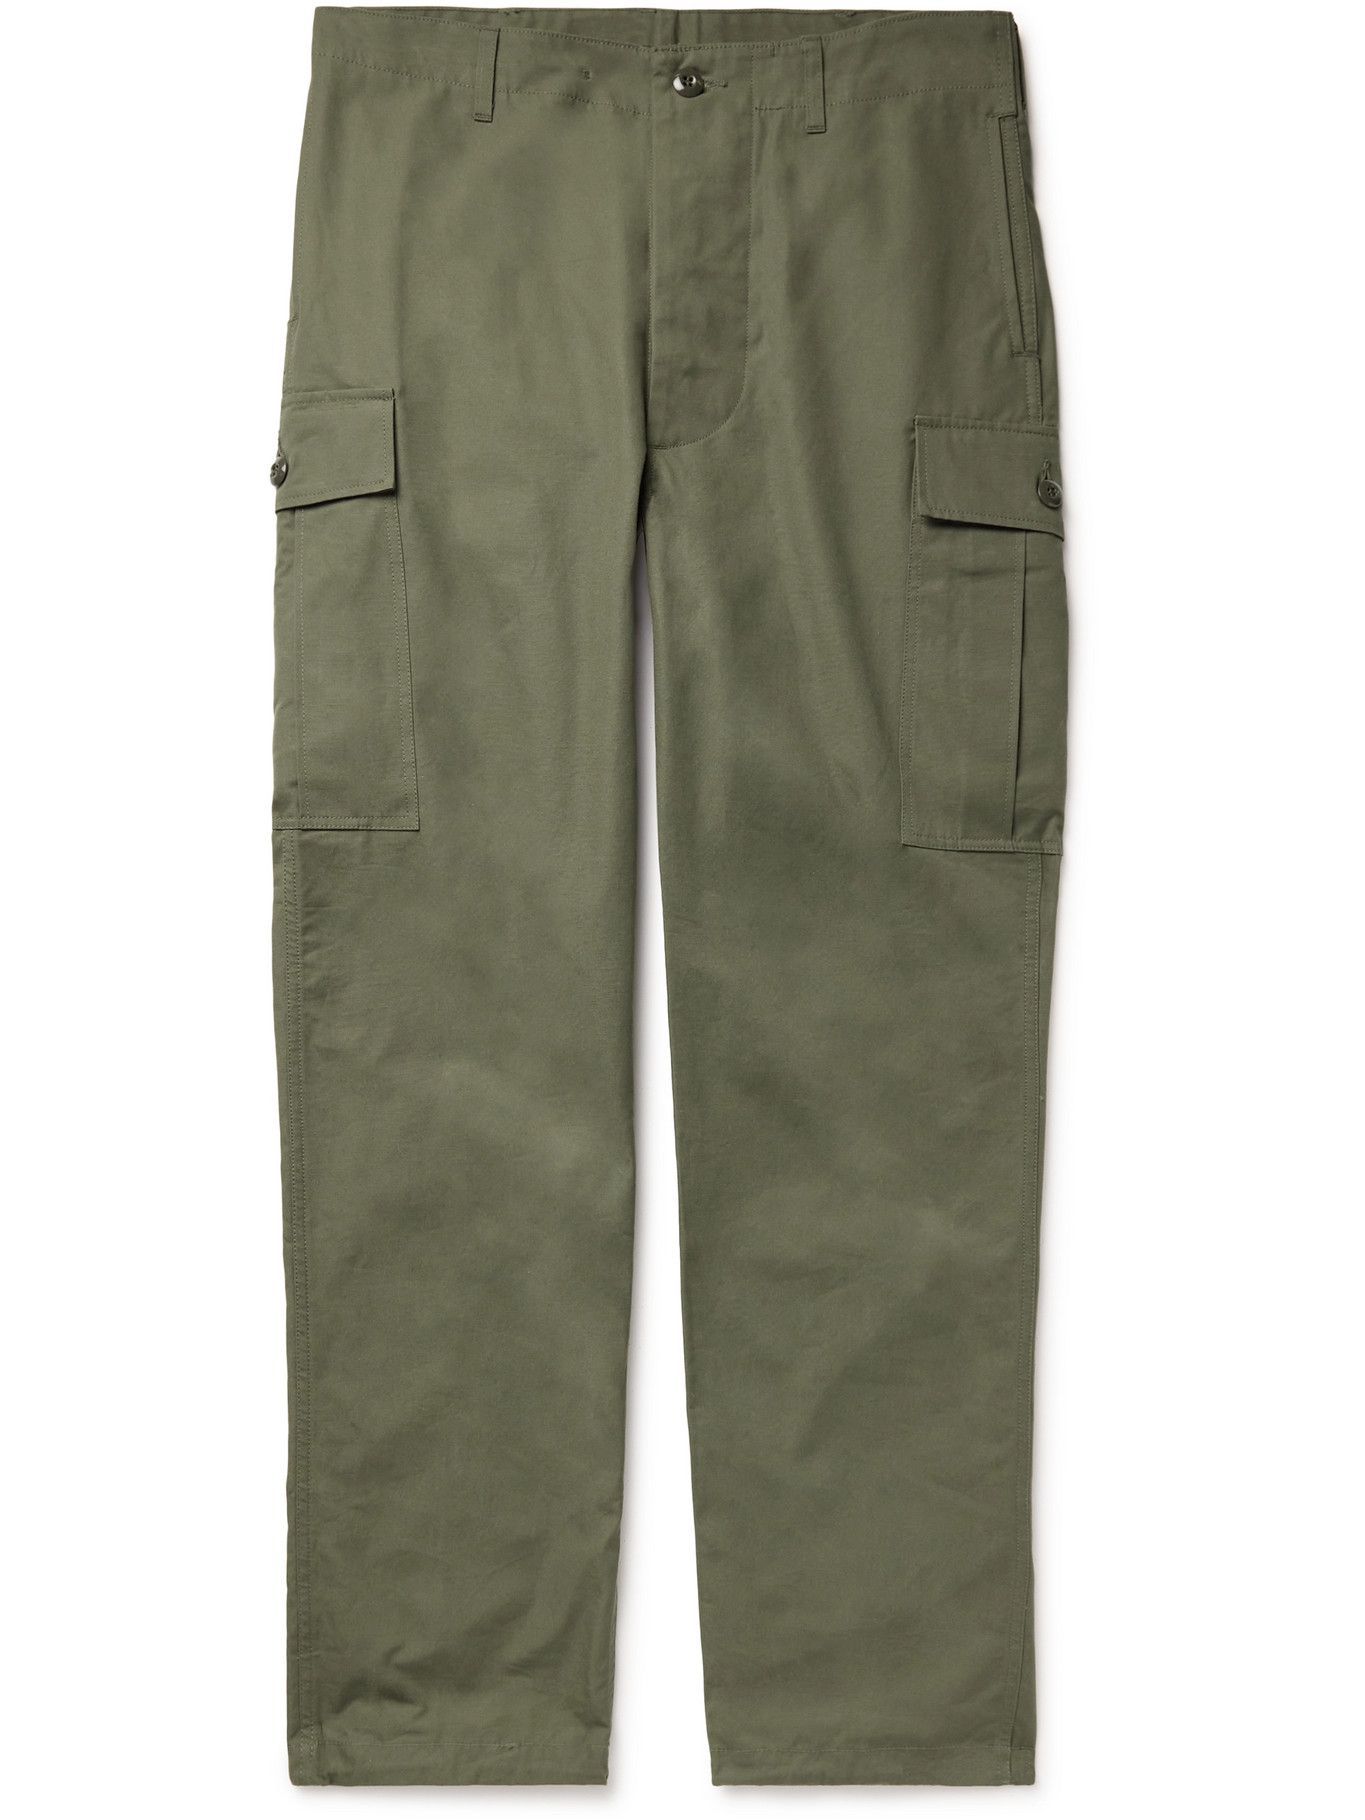 THE REAL MCCOY'S - Cotton-Poplin Cargo Trousers - Green The Real McCoys